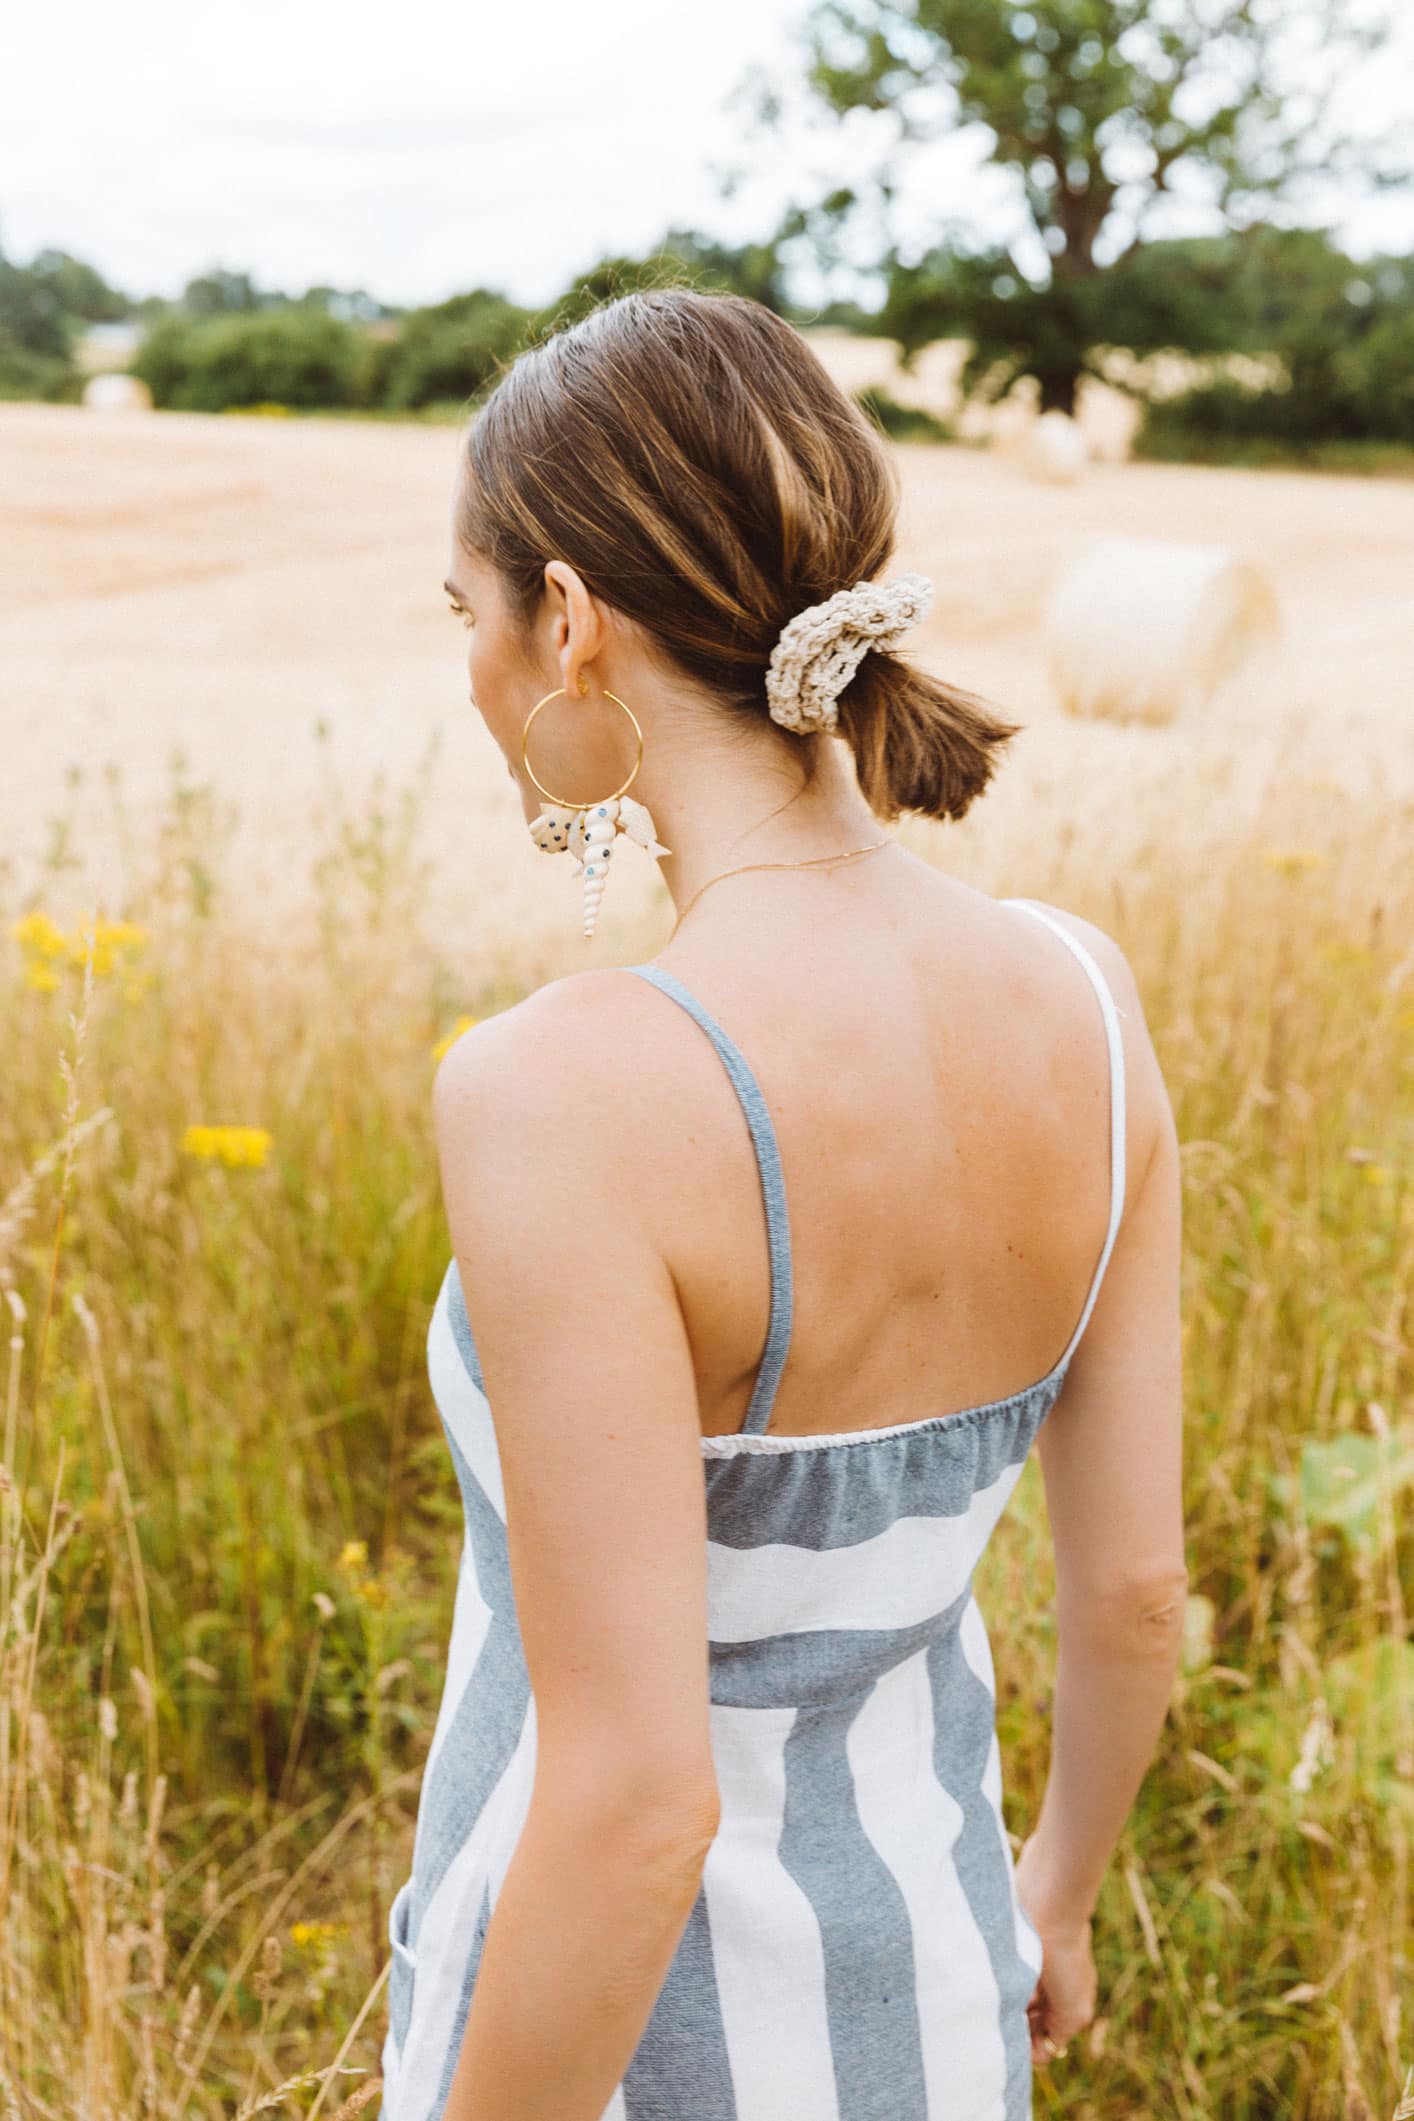 Louise Roe Wearing Summer Trends With Linen Dress Seashell Earrings and Scrunchies